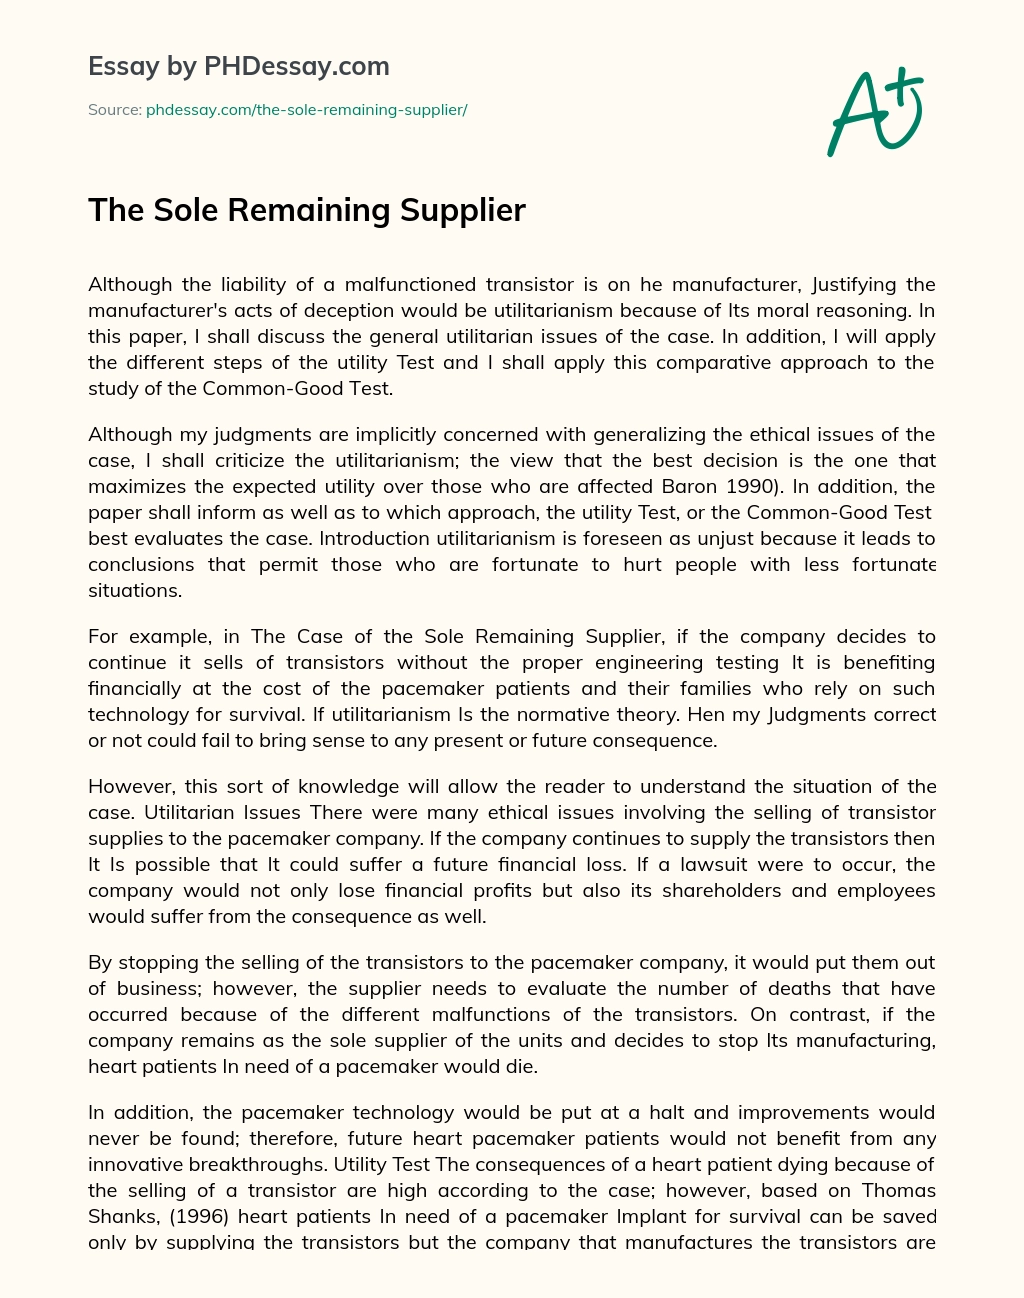 The Sole Remaining Supplier essay